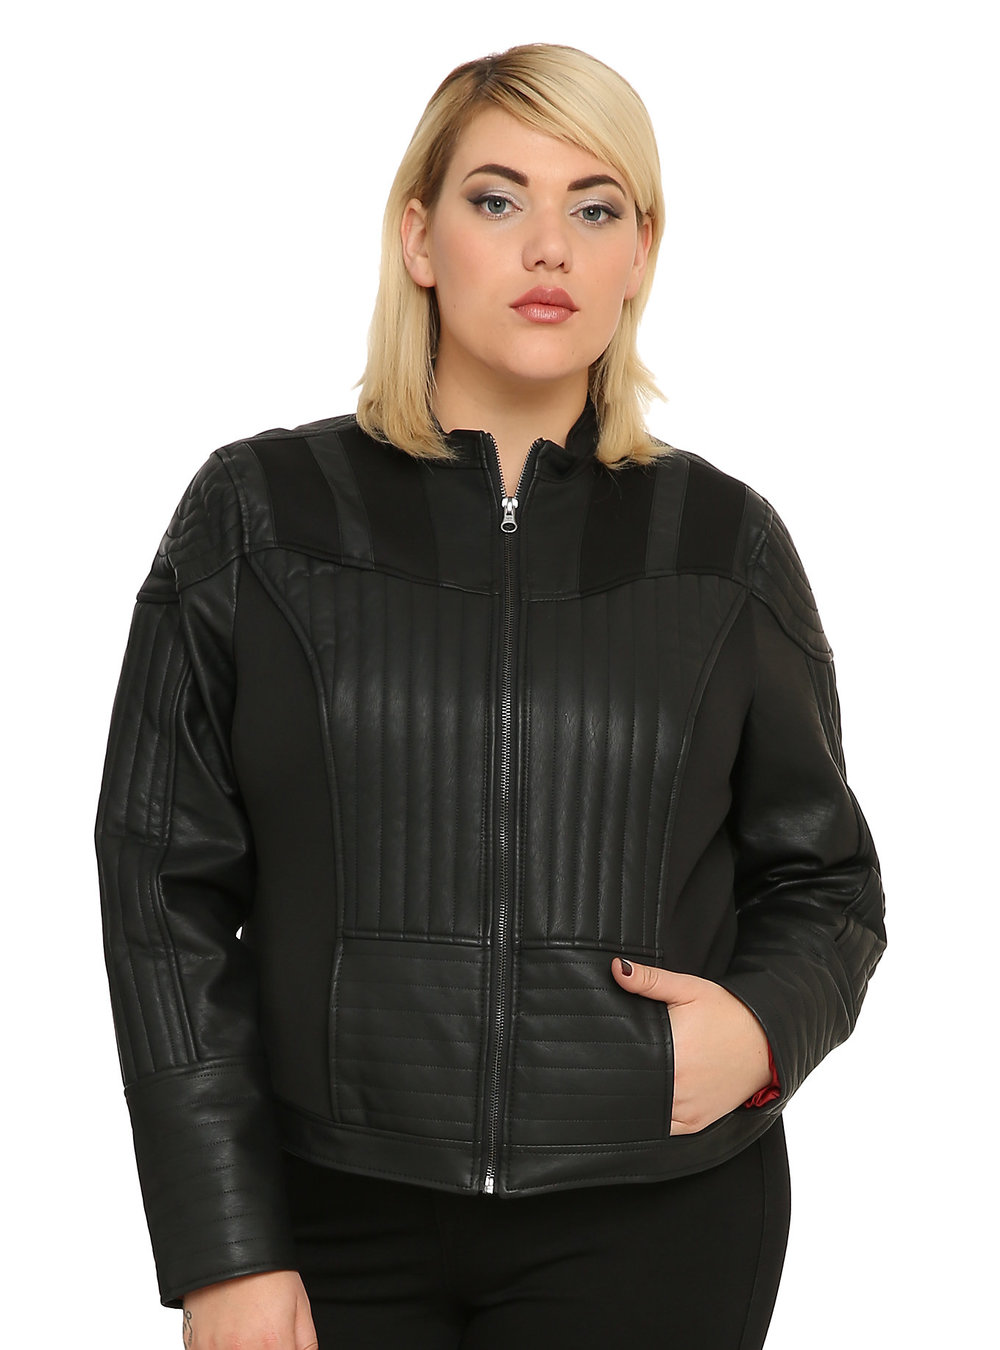  Darth Vader Faux Leather Jacket. Hot Topic. Was: $89 Now: $62. Available in straight and plus sizes.  